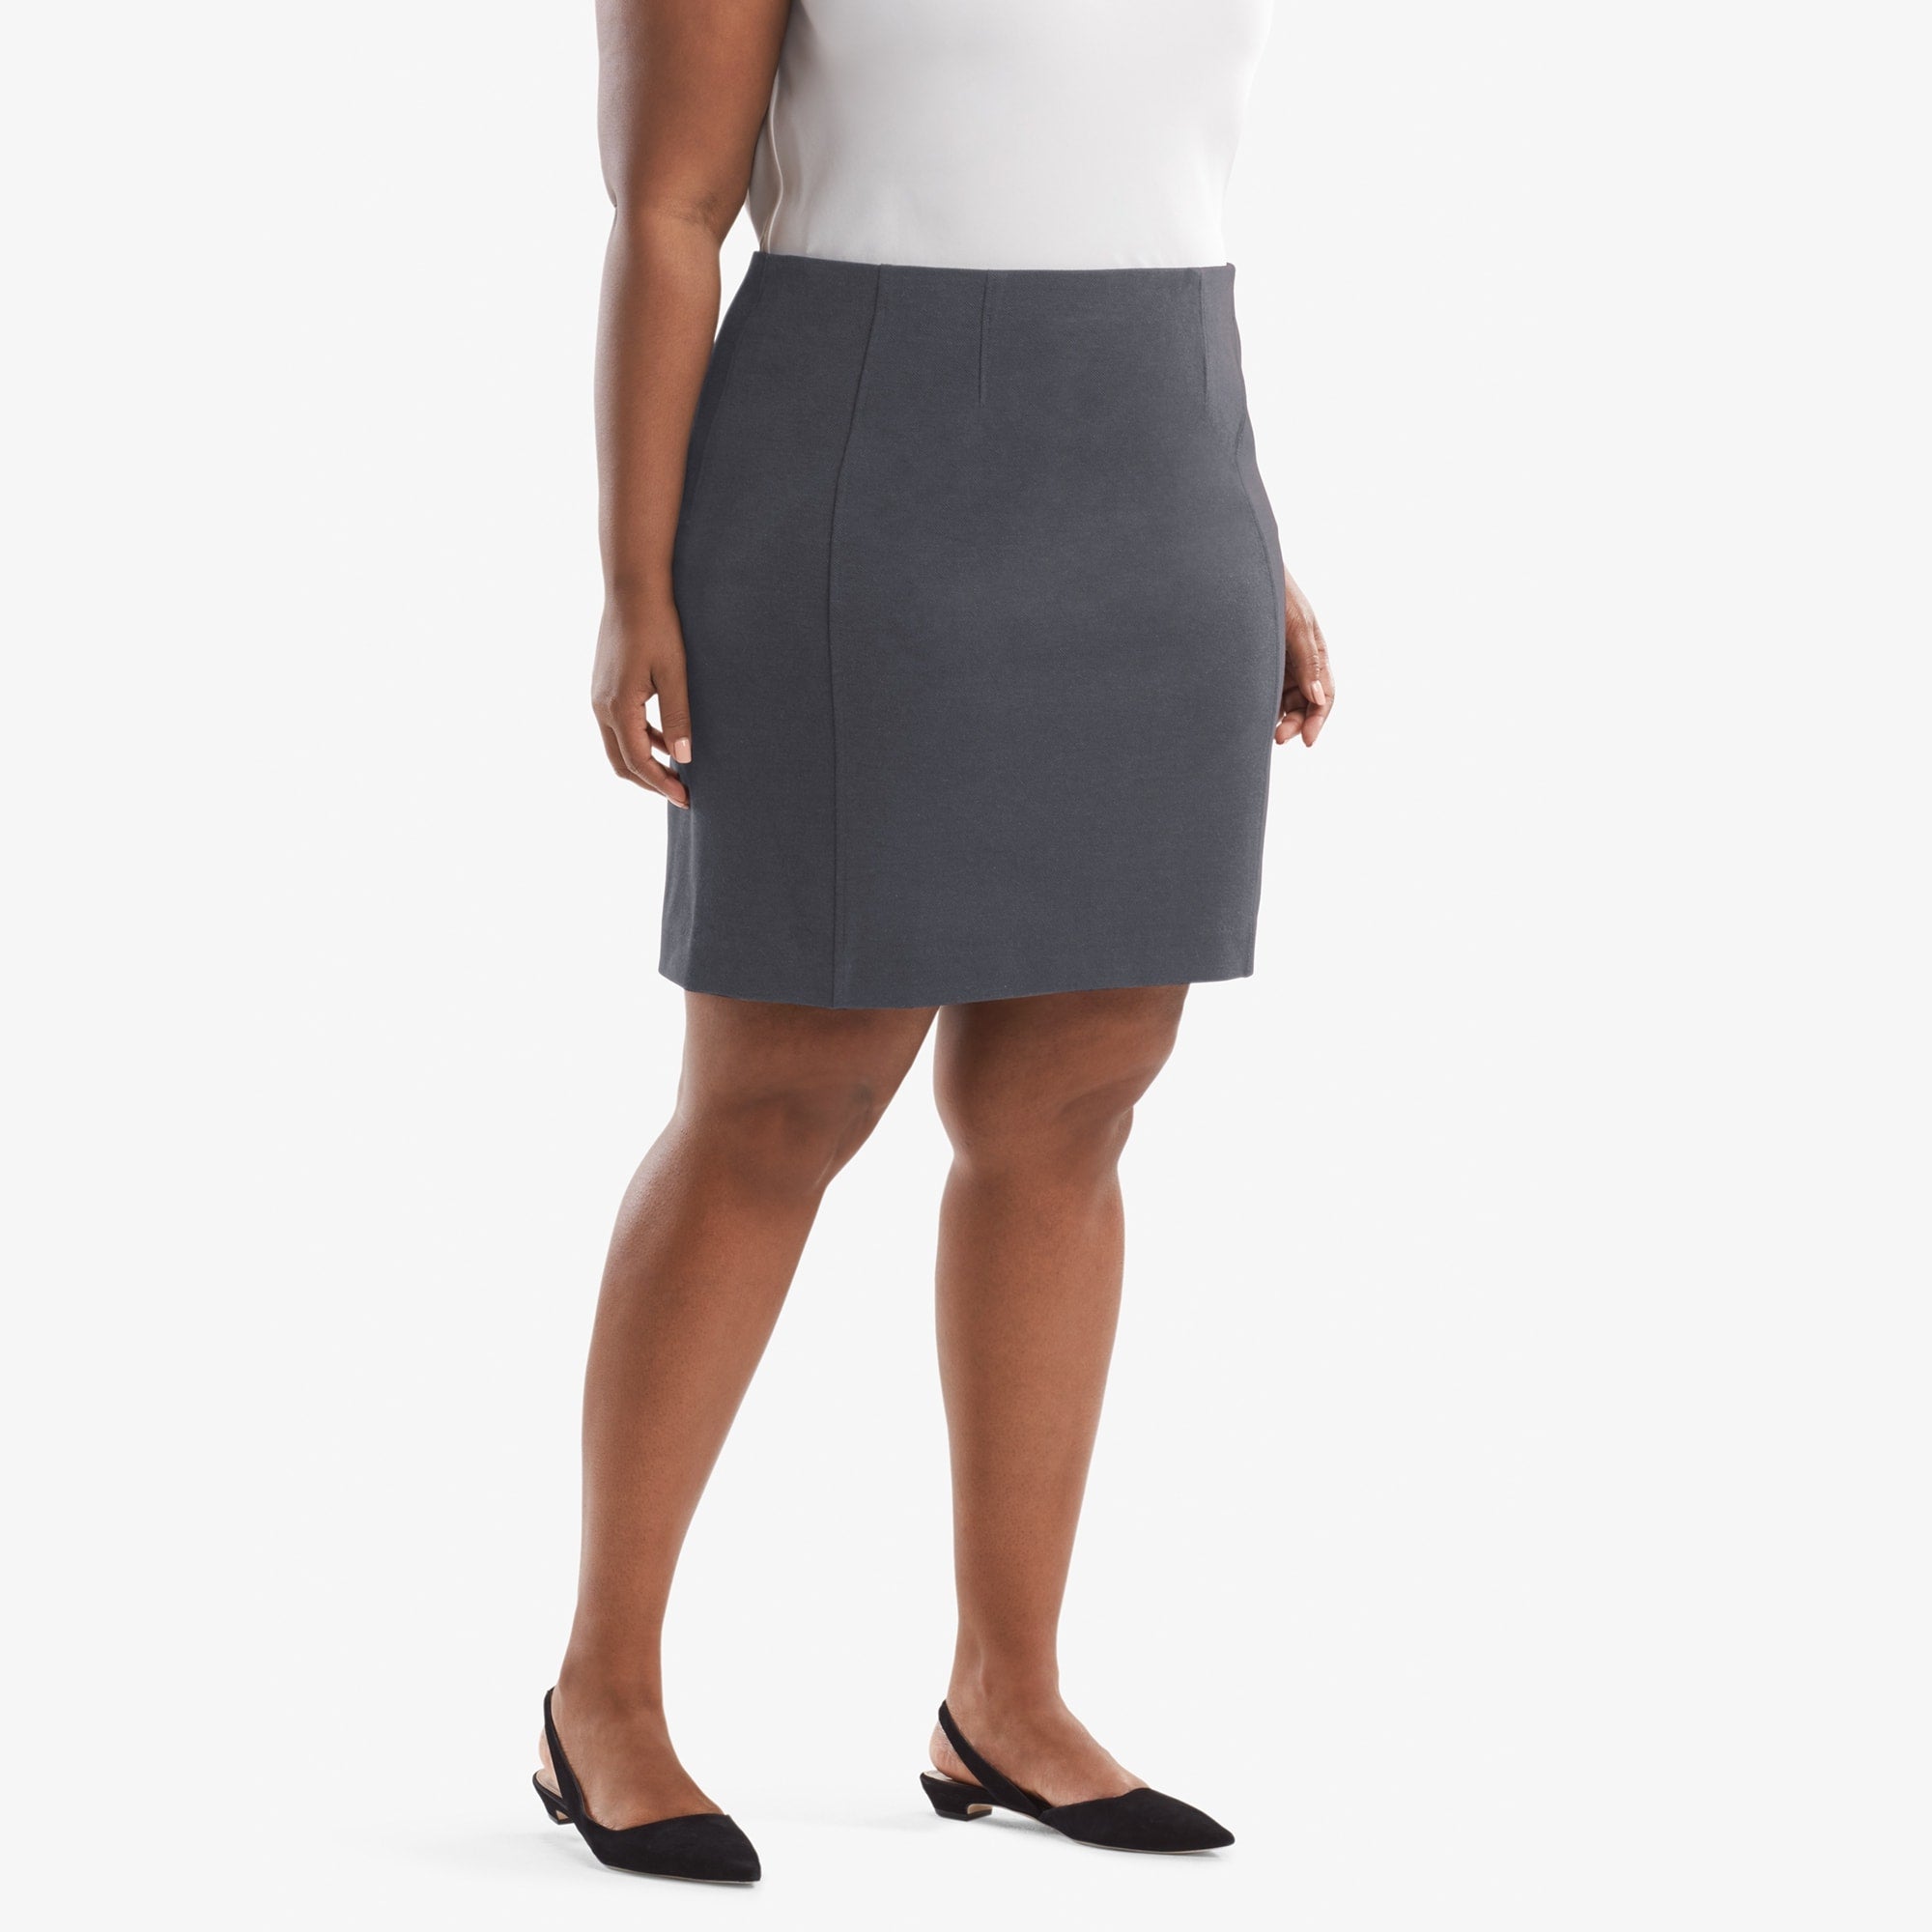 Side image of a woman standing wearing the Crosby skirt textured ponte in Charcoal